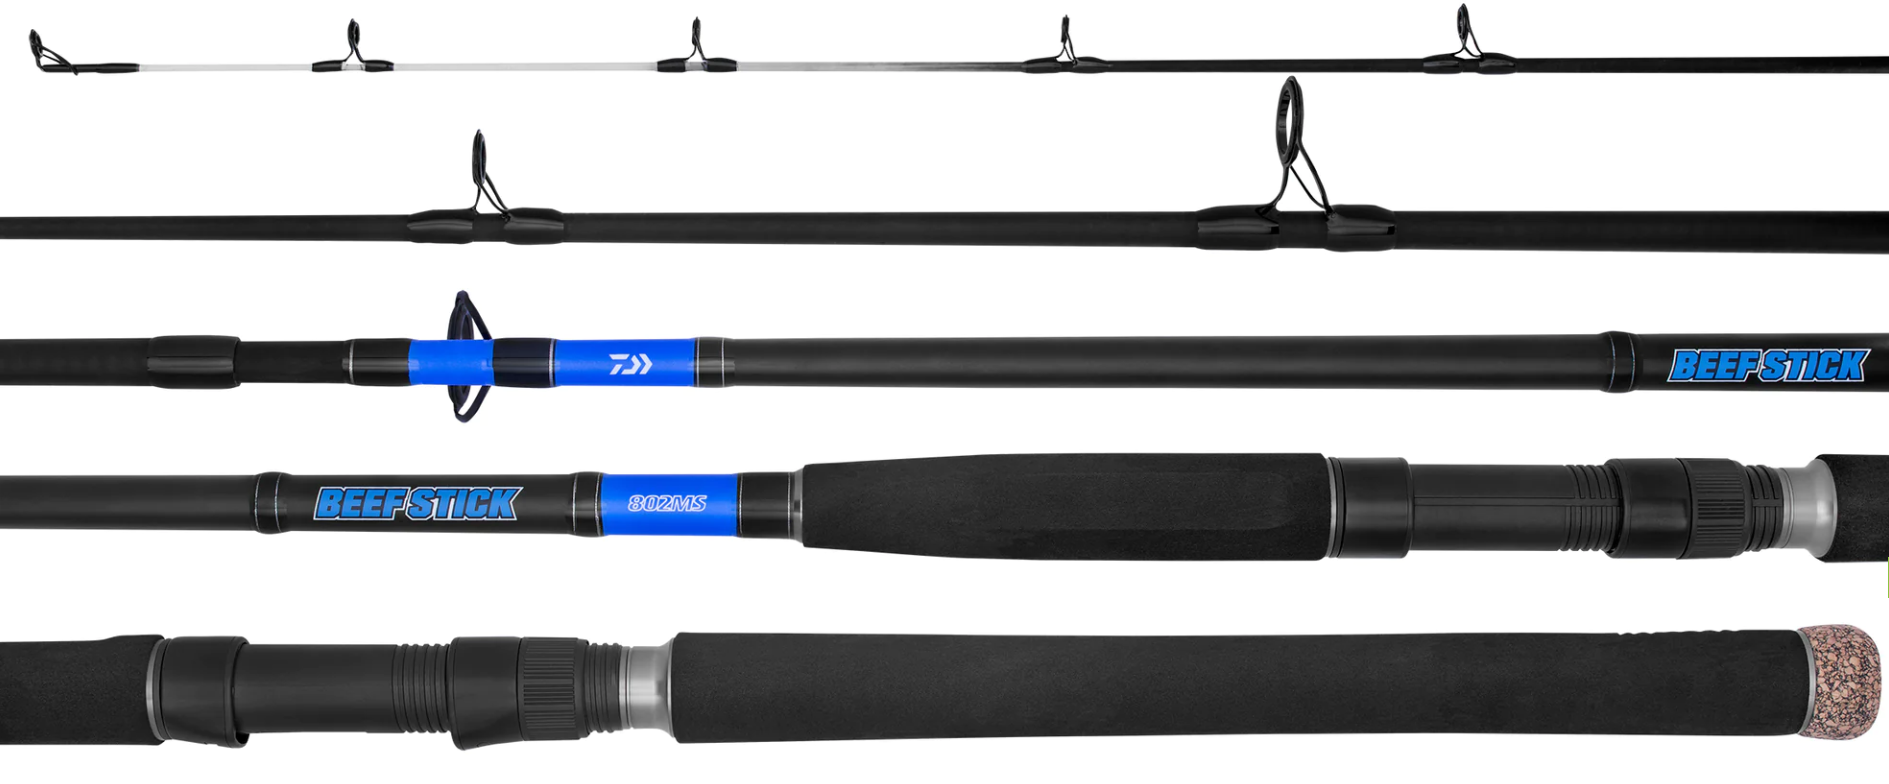 Daiwa Beefstick Spin Rod - 602MLS 3-5KG - Mansfield Hunting & Fishing - Products to prepare for Corona Virus